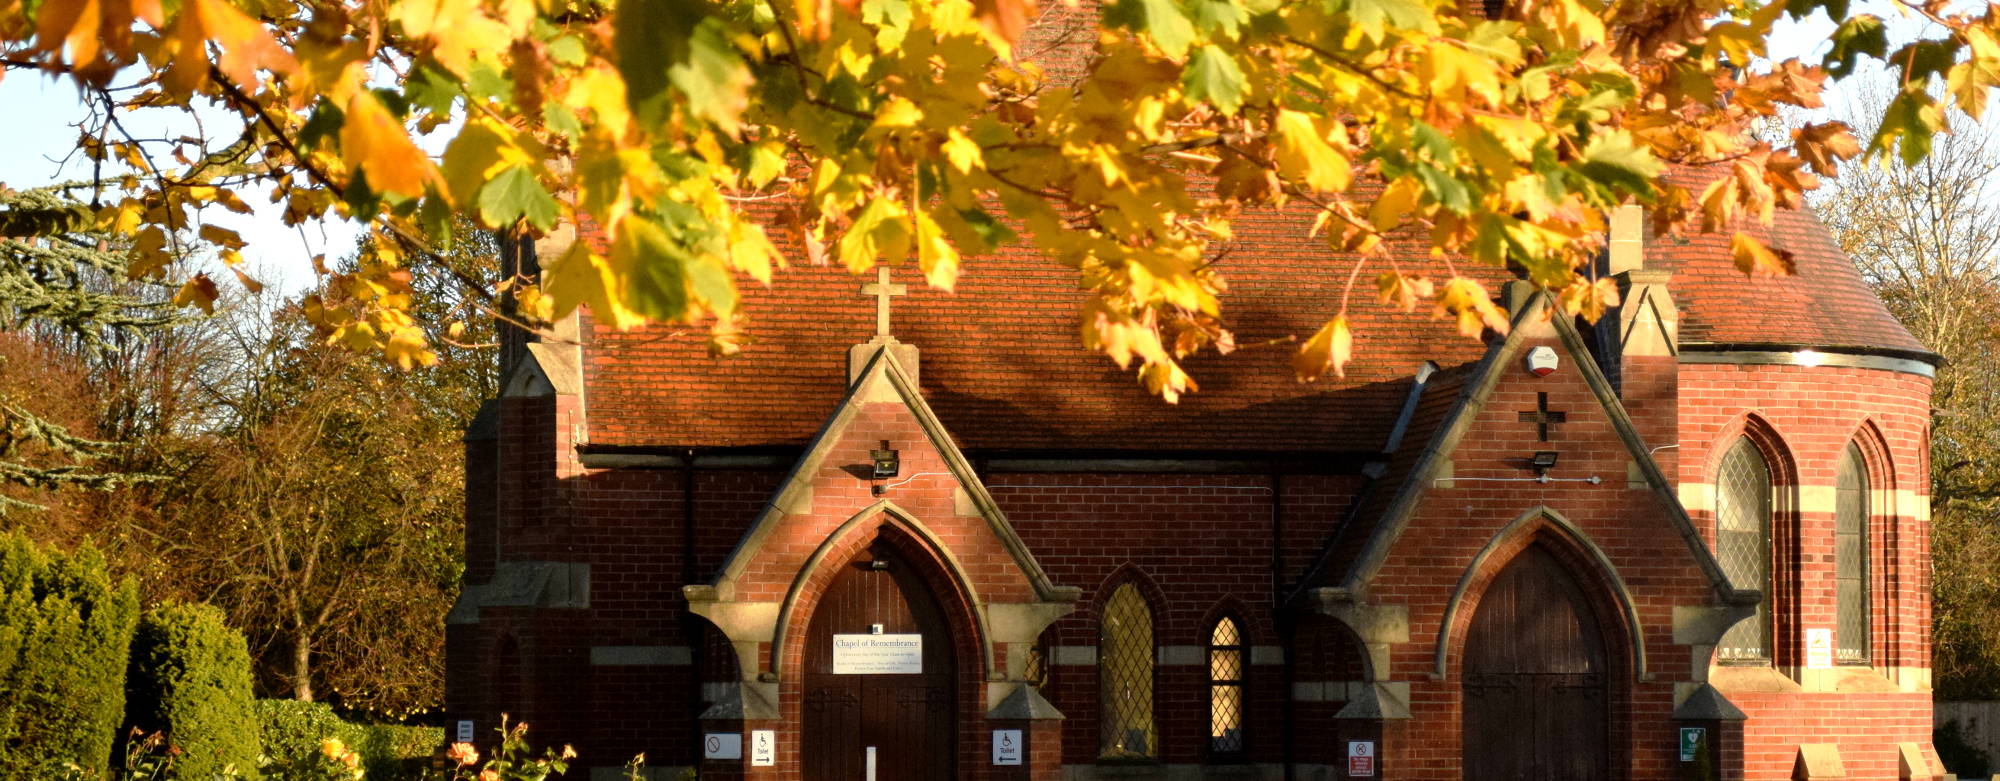 The Chapel of Remembrance surrounded by autumn leaves